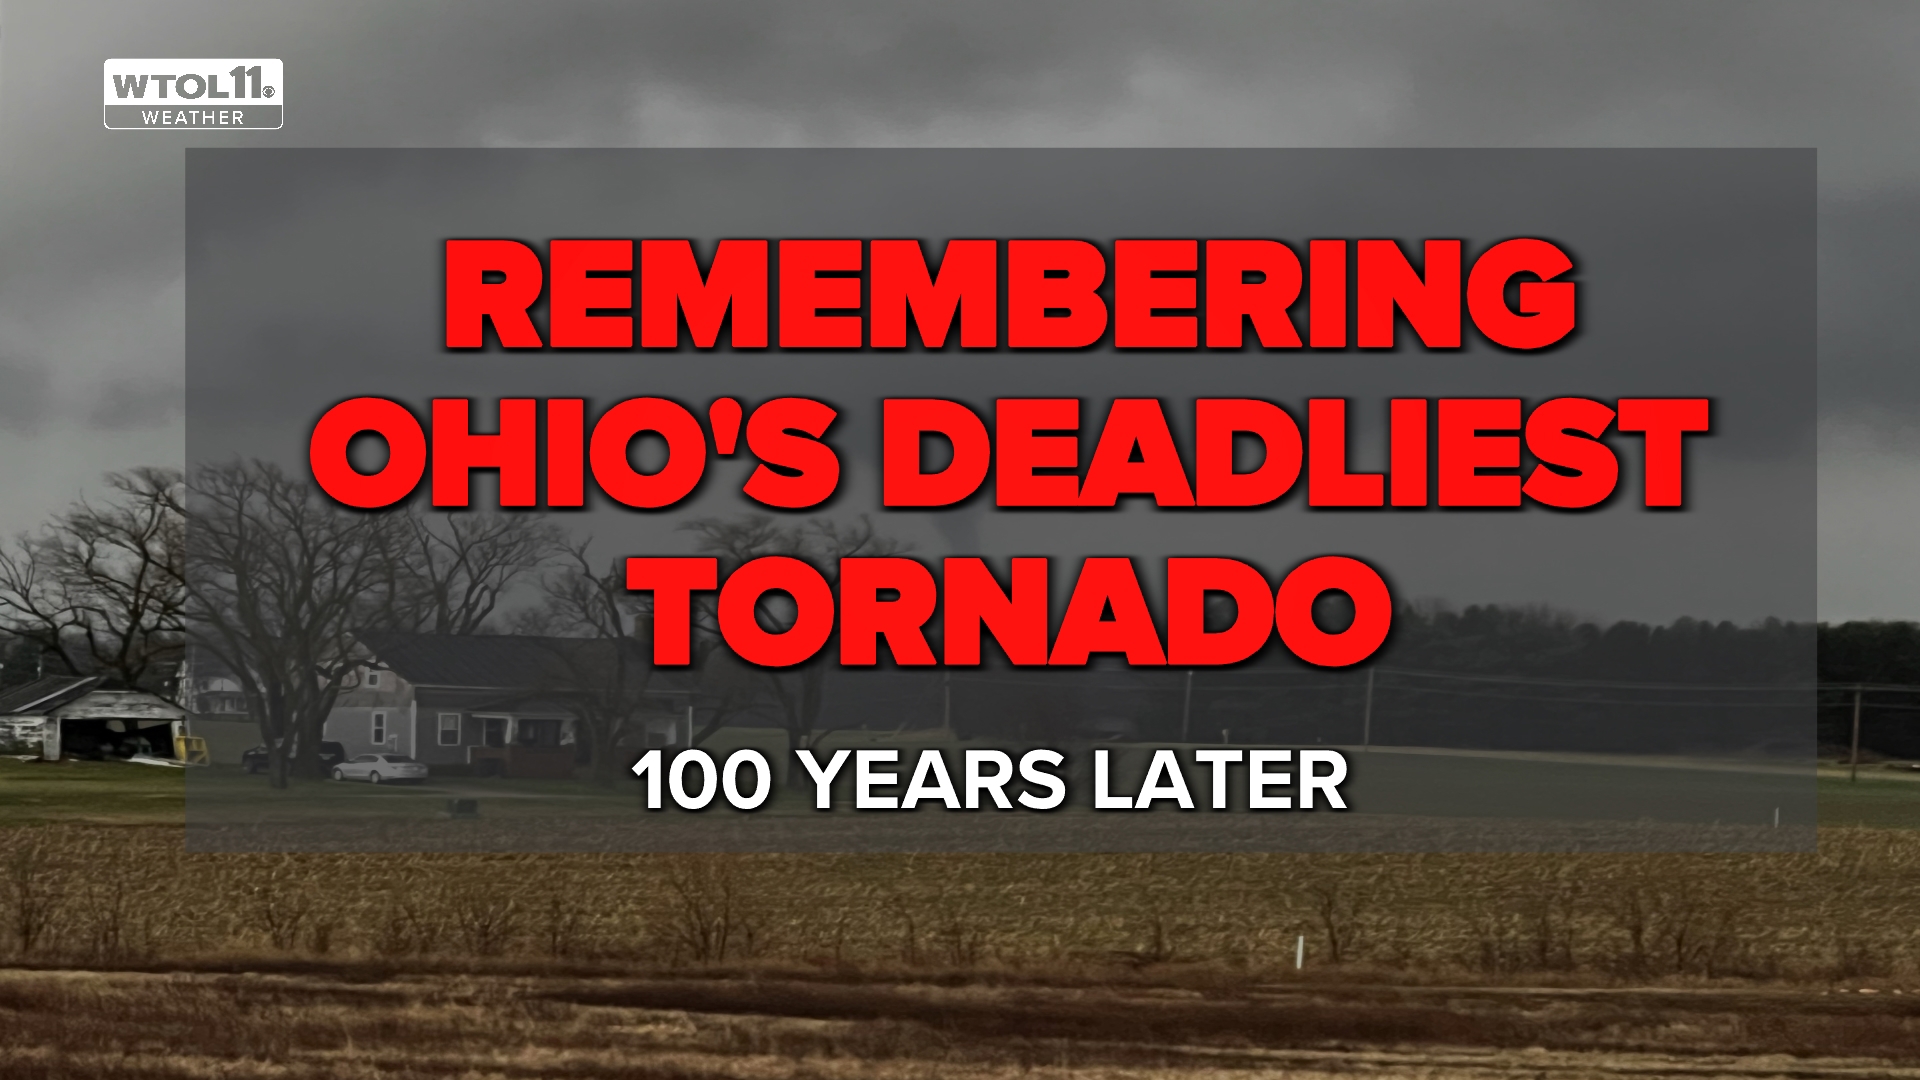 The tornado that caused 85 recorded fatalities occurred on June 28, 1924. It eventually traveled to Lorain, where the most significant damage happened.